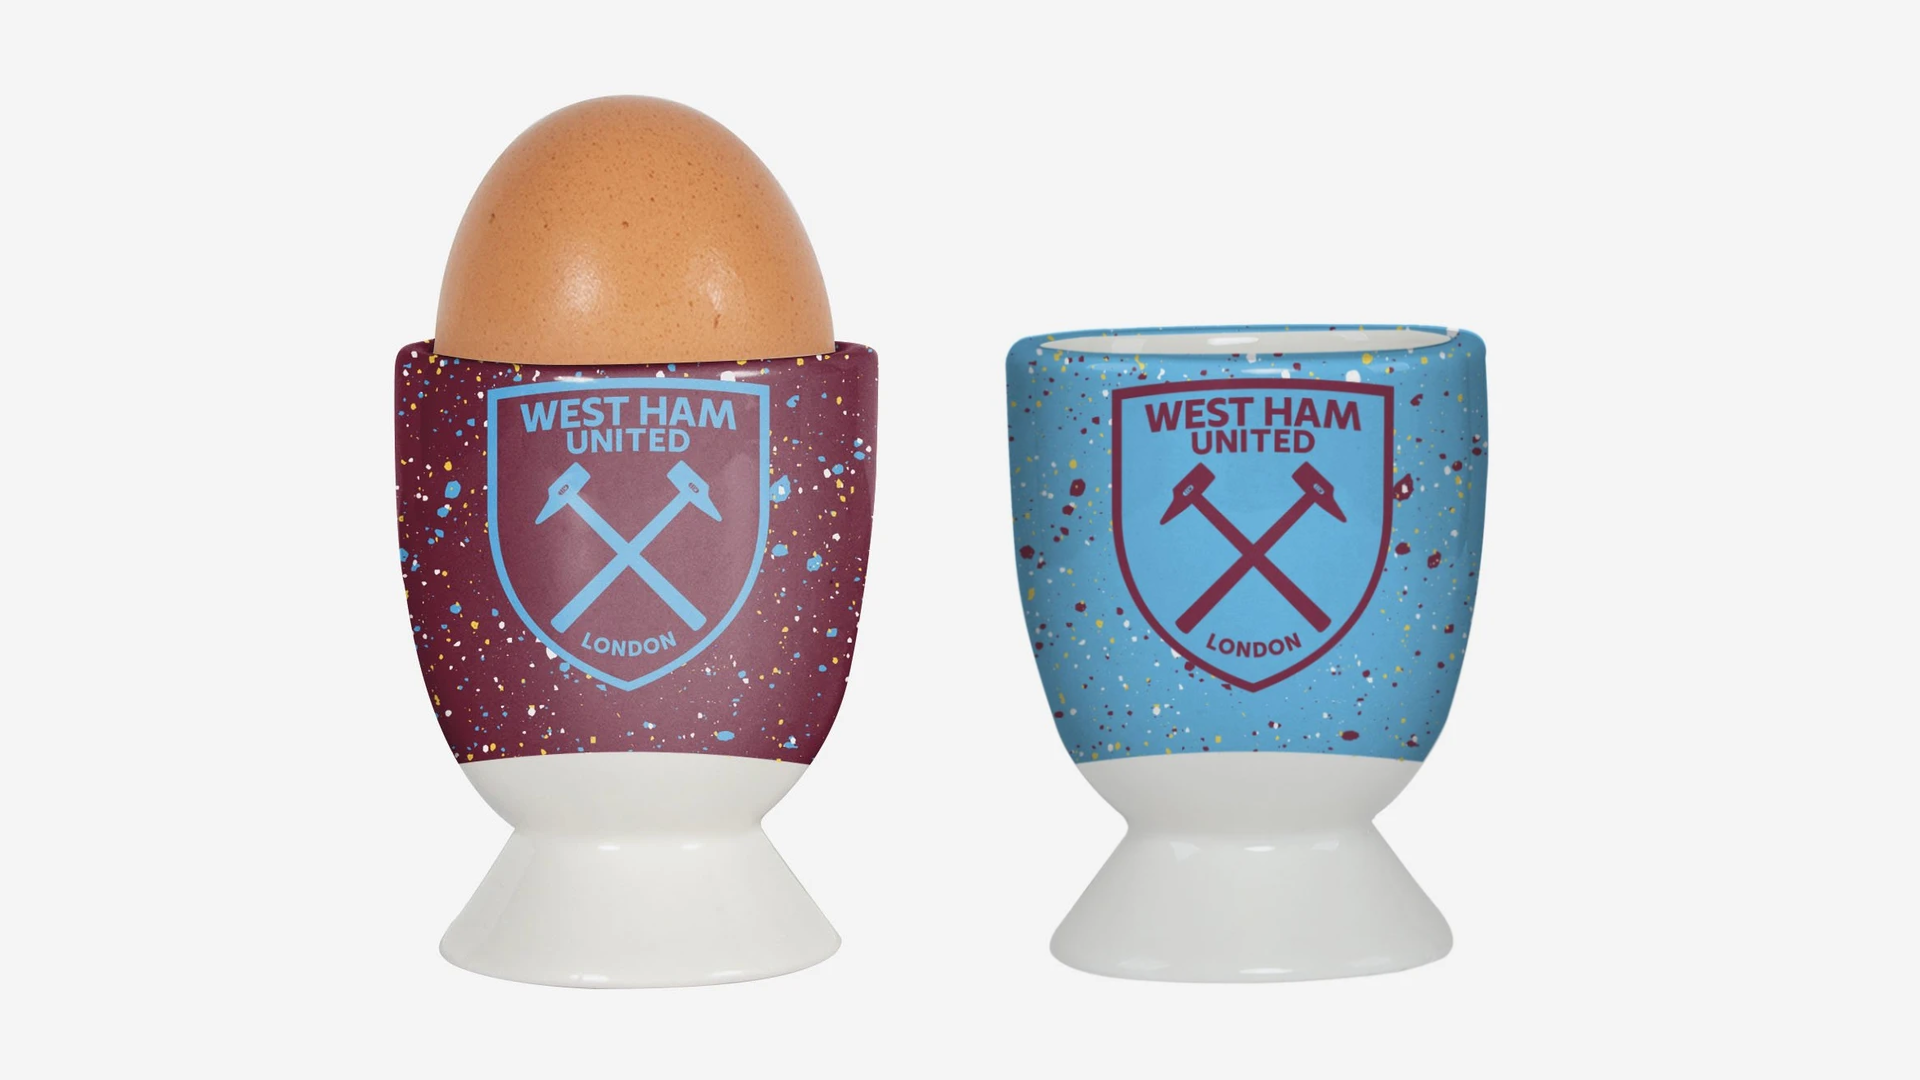 West Ham United Egg Cup Chequered Check Design Football Gift 